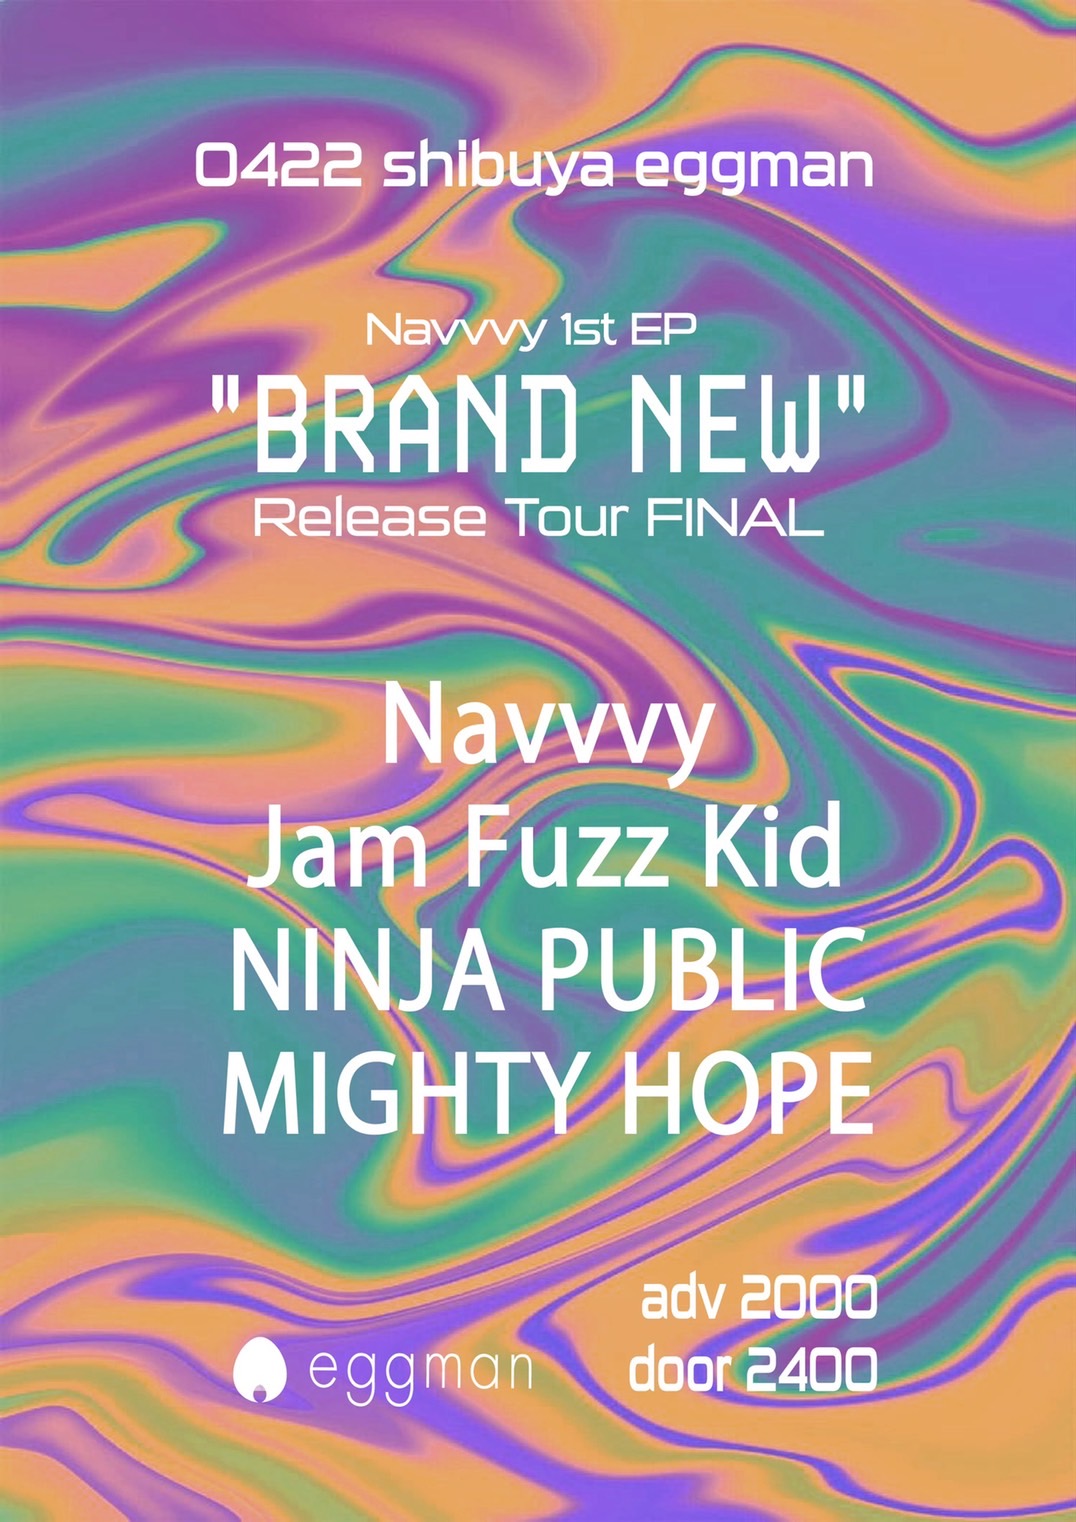 Navvvy 1st EP”BRAND NEW” Release Tour FINAL!